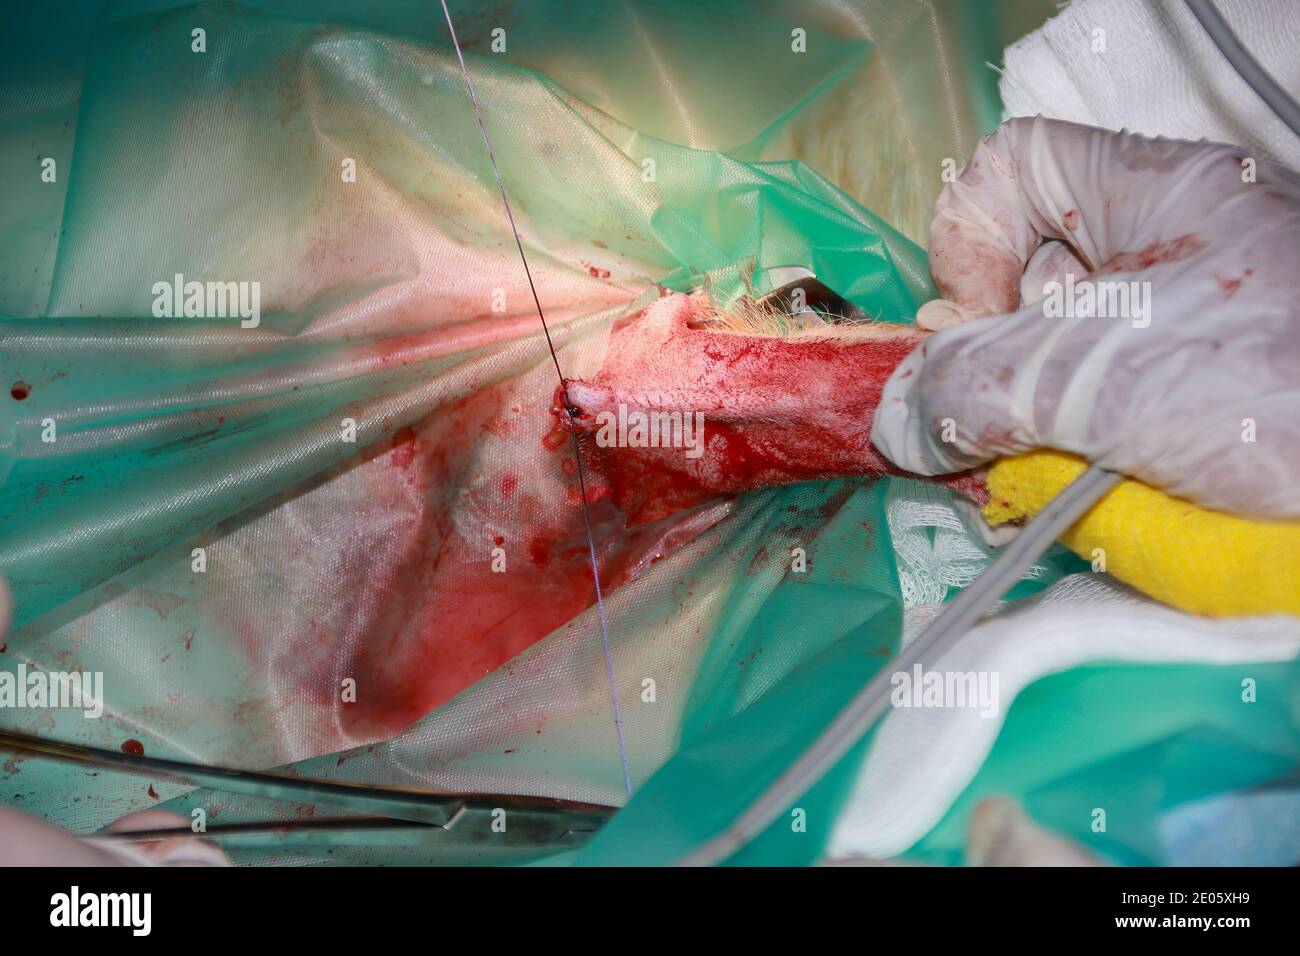 A Veterinary Surgeon uses surgical suture materials to close a wound after removing a tumor from a domestic Labrador puppy Stock Photo